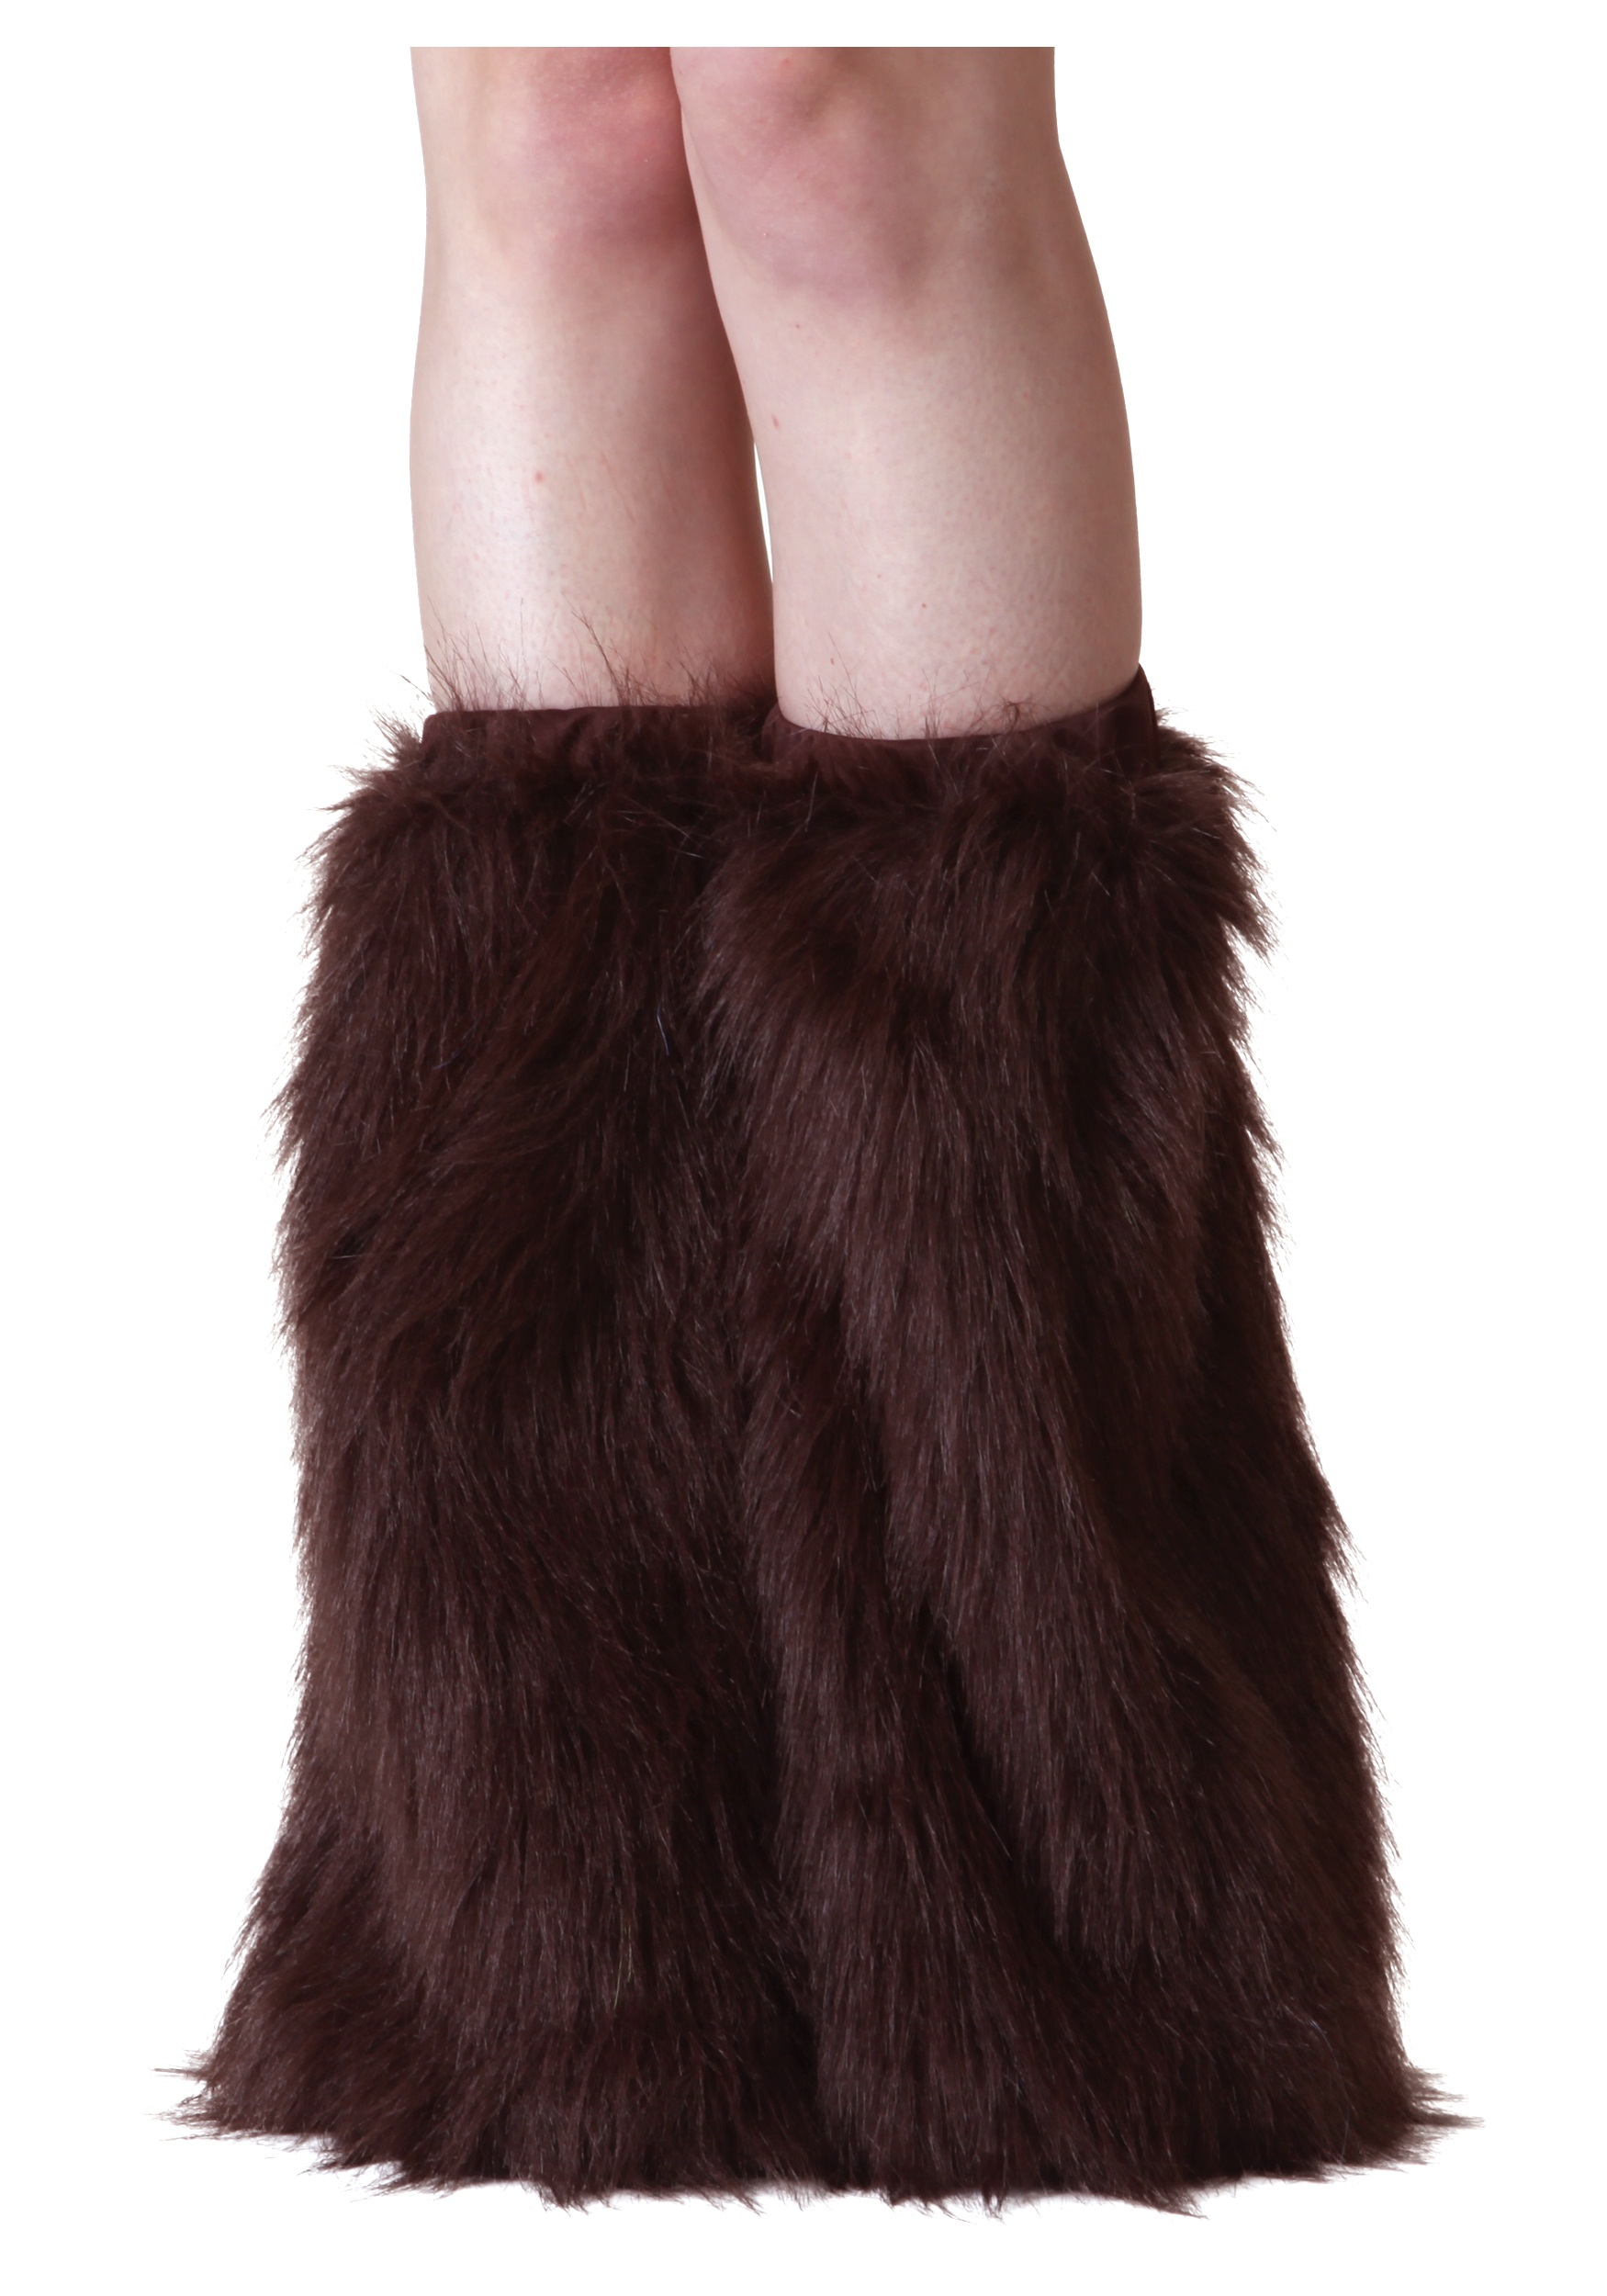 Buy > fluffy brown boots > in stock